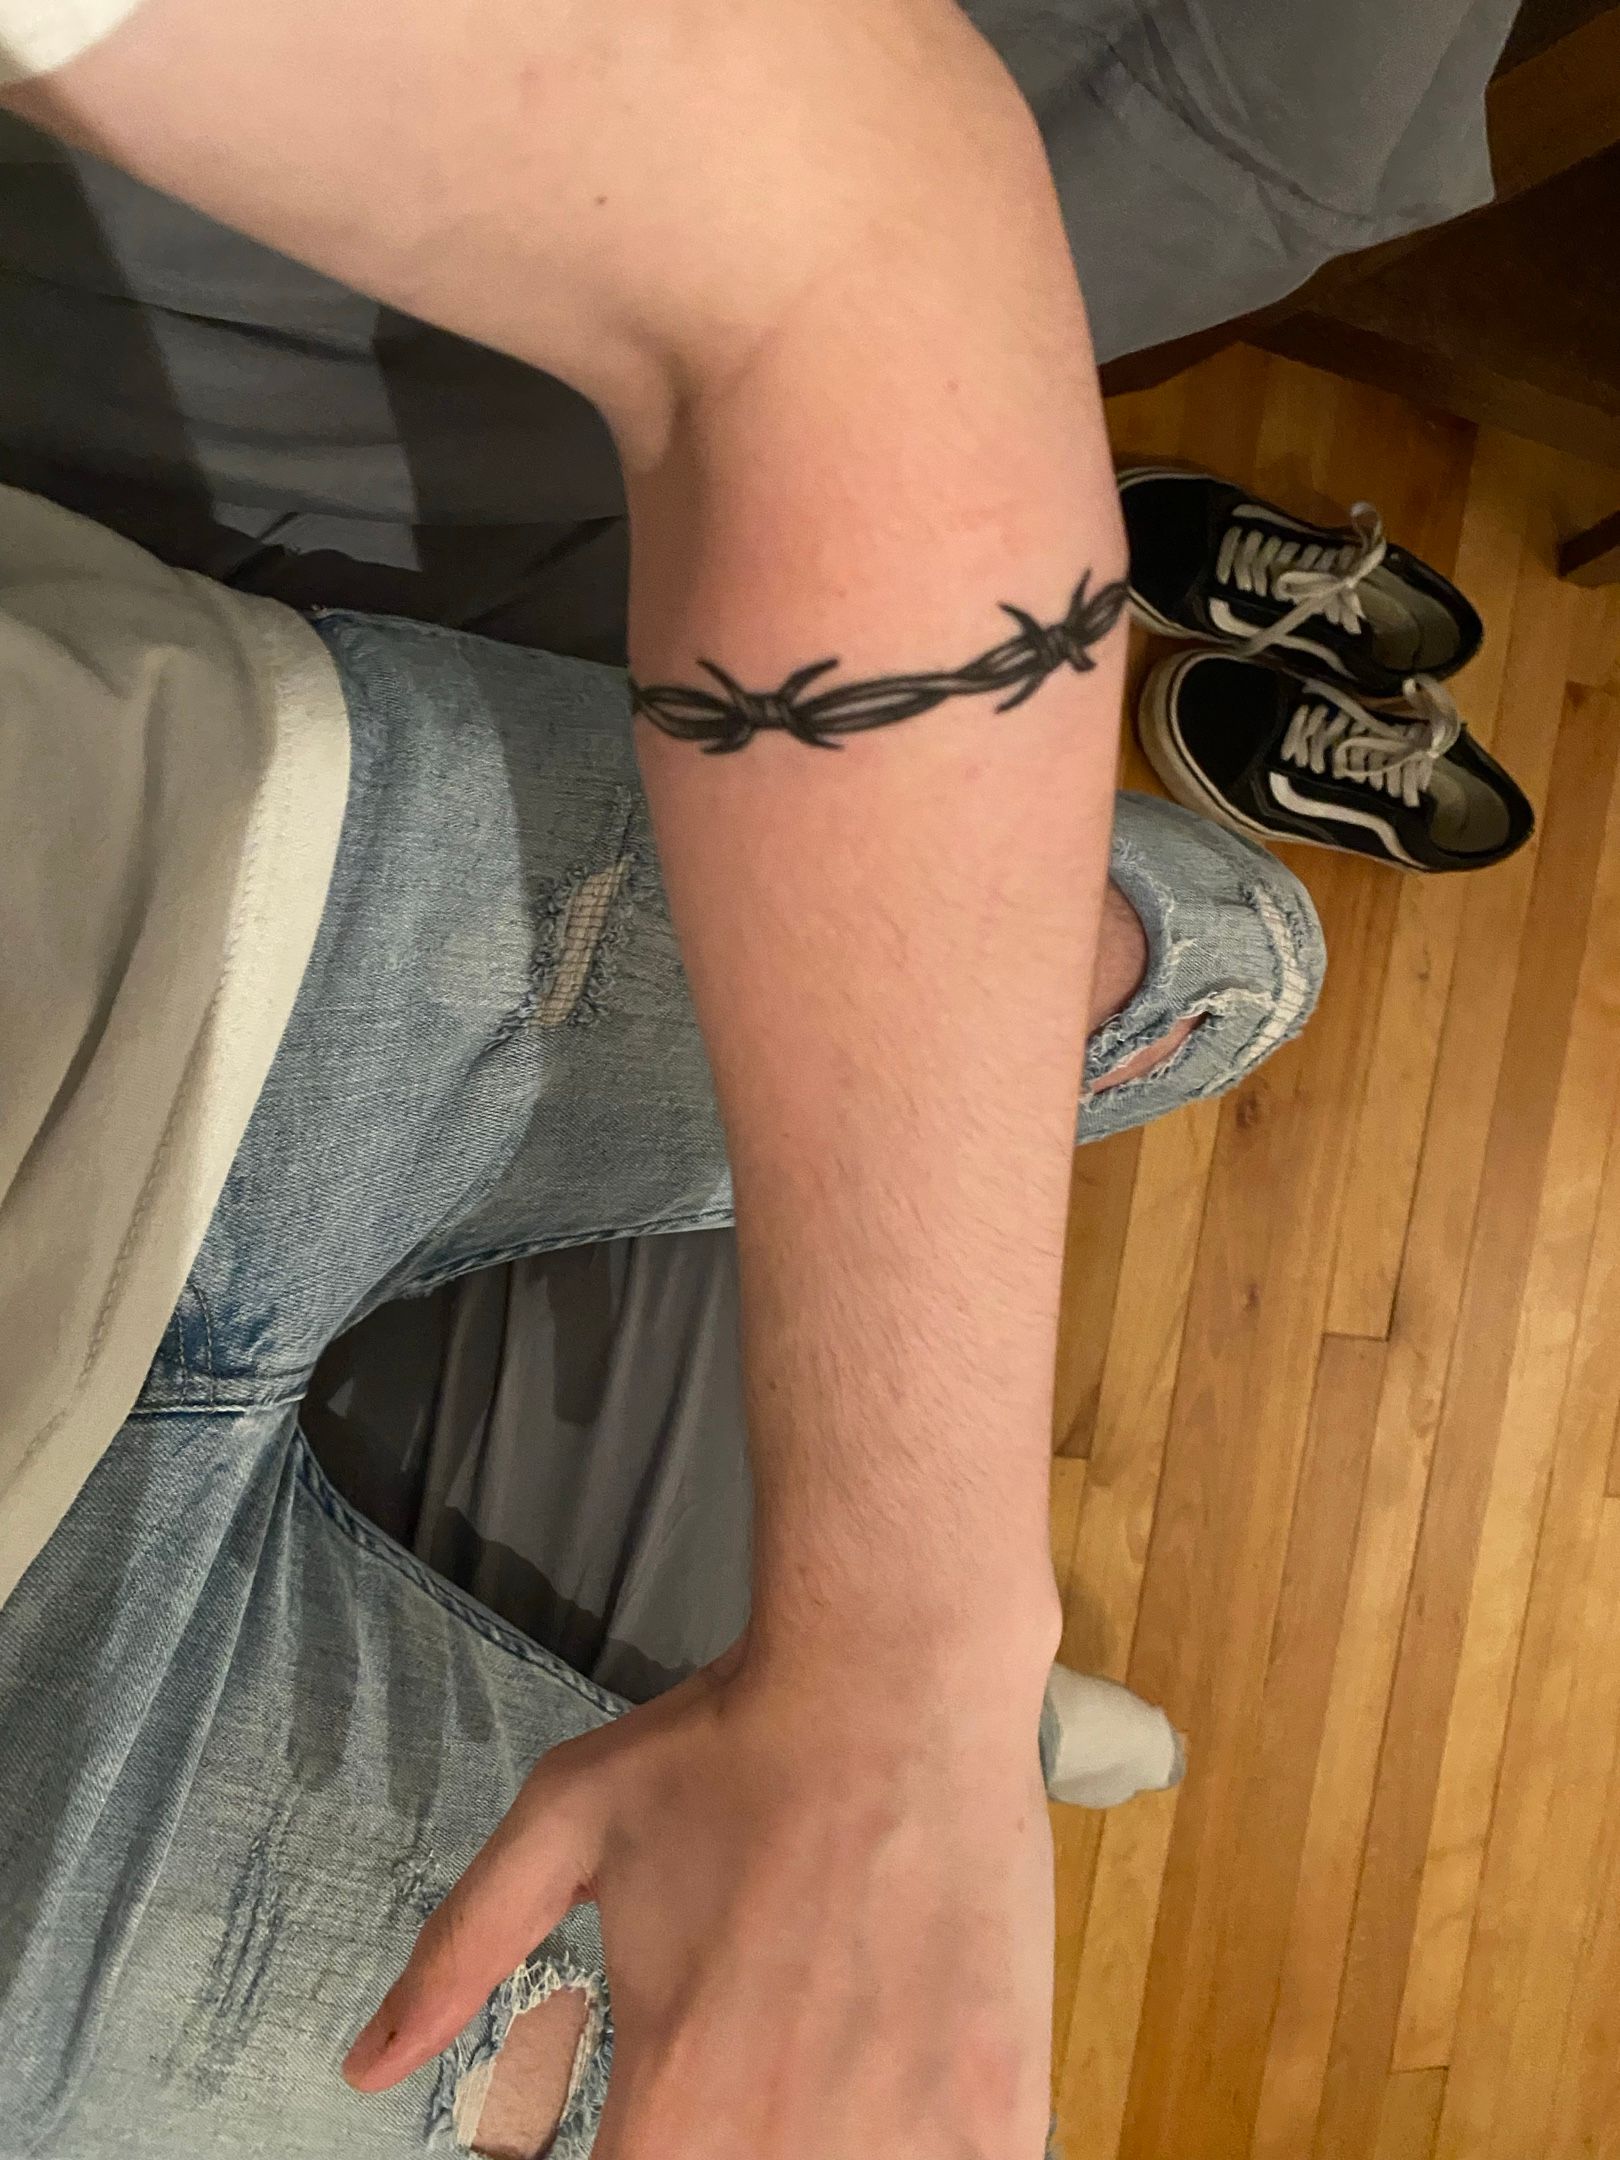 Barbed wire tattoo meaning  facts and photos for tattoovaluenet  YouTube